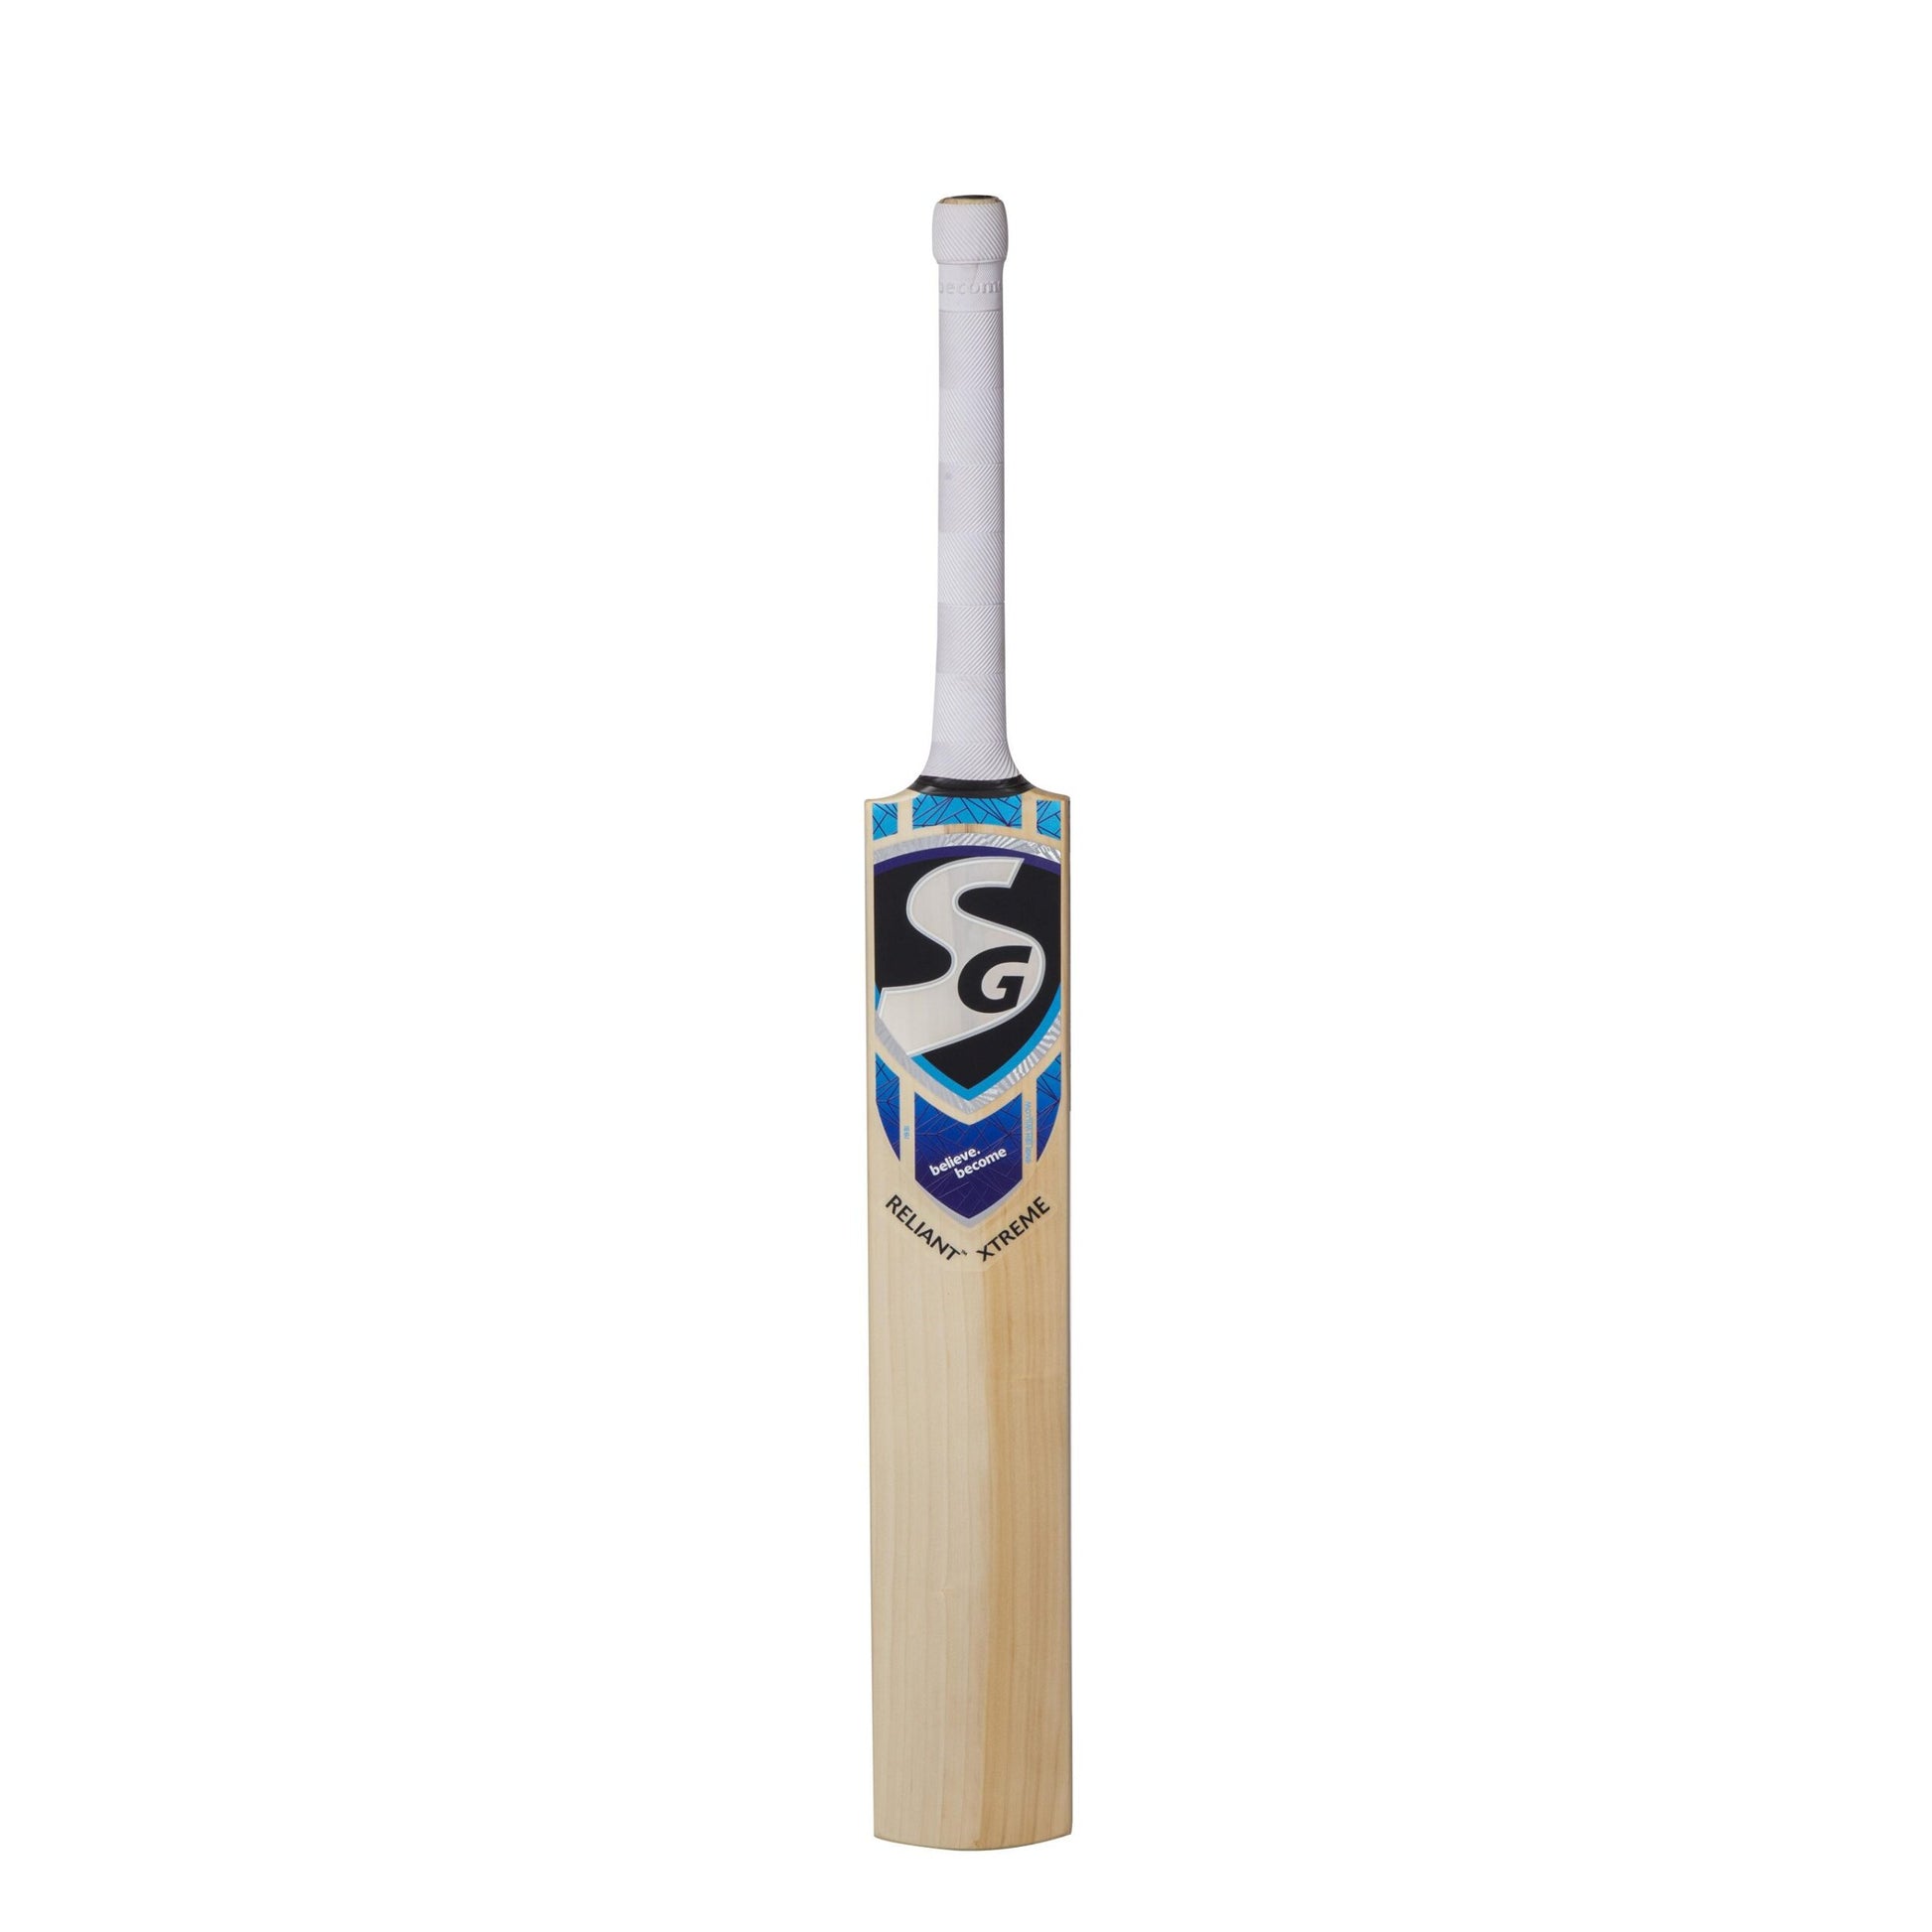 SG Reliant Xtreme Grade 5 English willow hard pressed &amp; traditionally shaped for superb stroke Cricket Bat (Leather Ball)